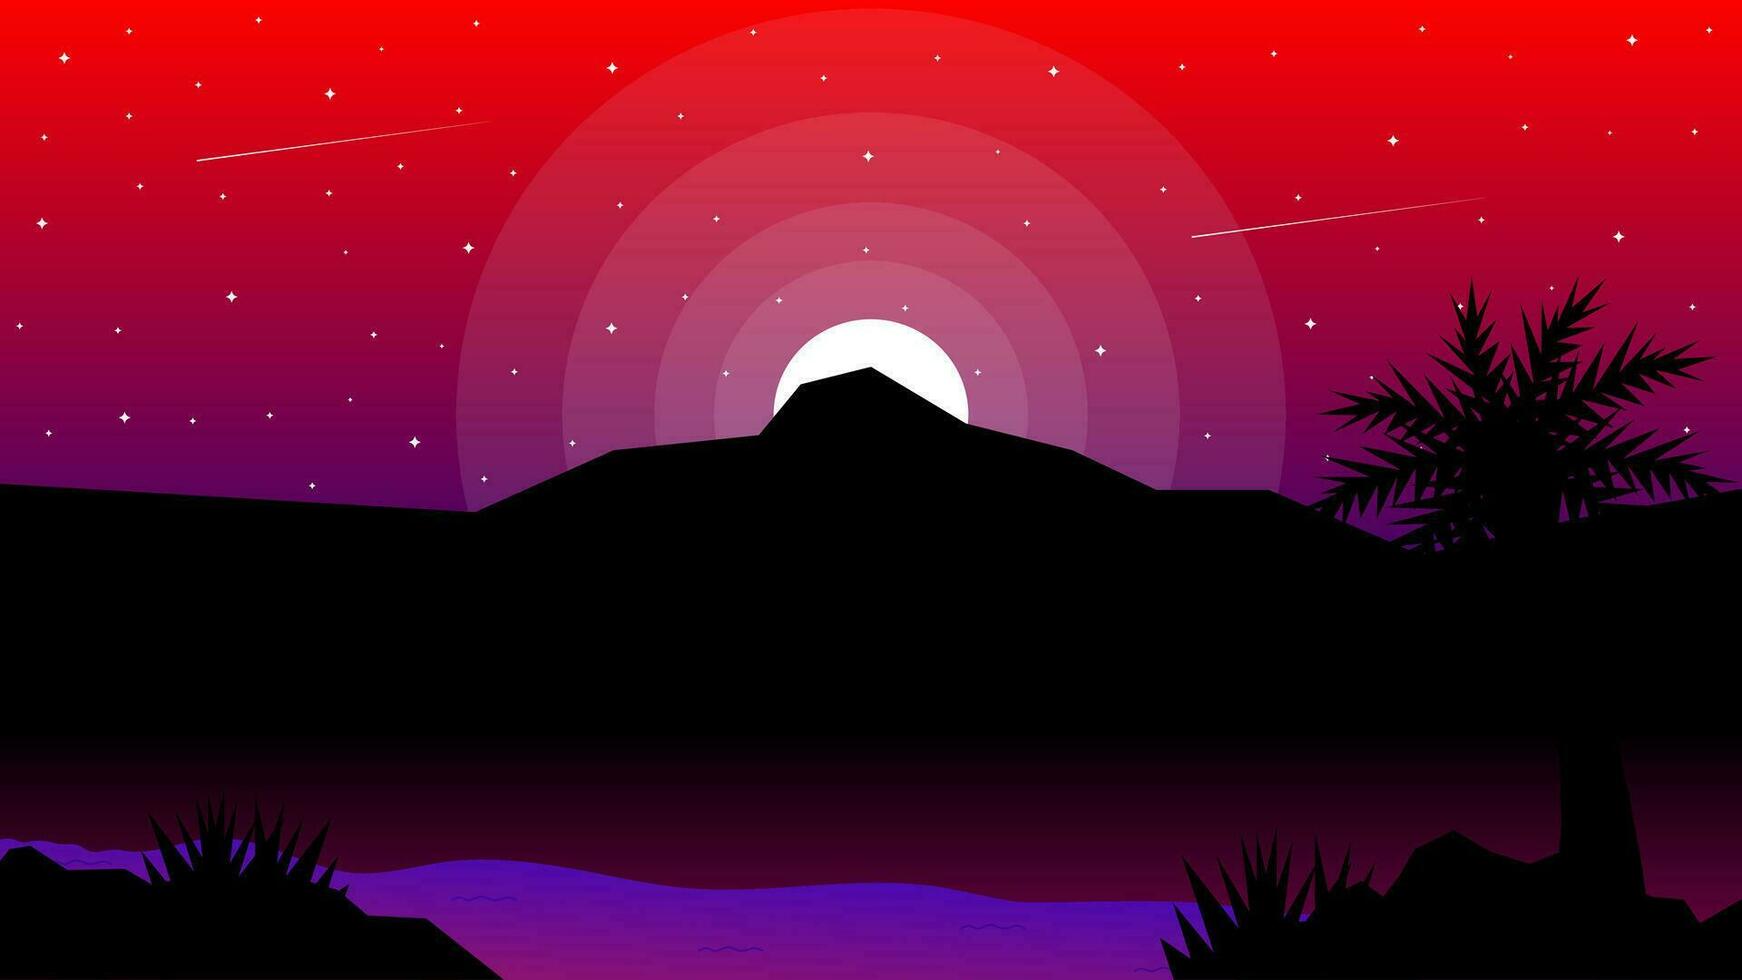 Vector illustration of a mountain with a red and purple sky with moonlight in the background